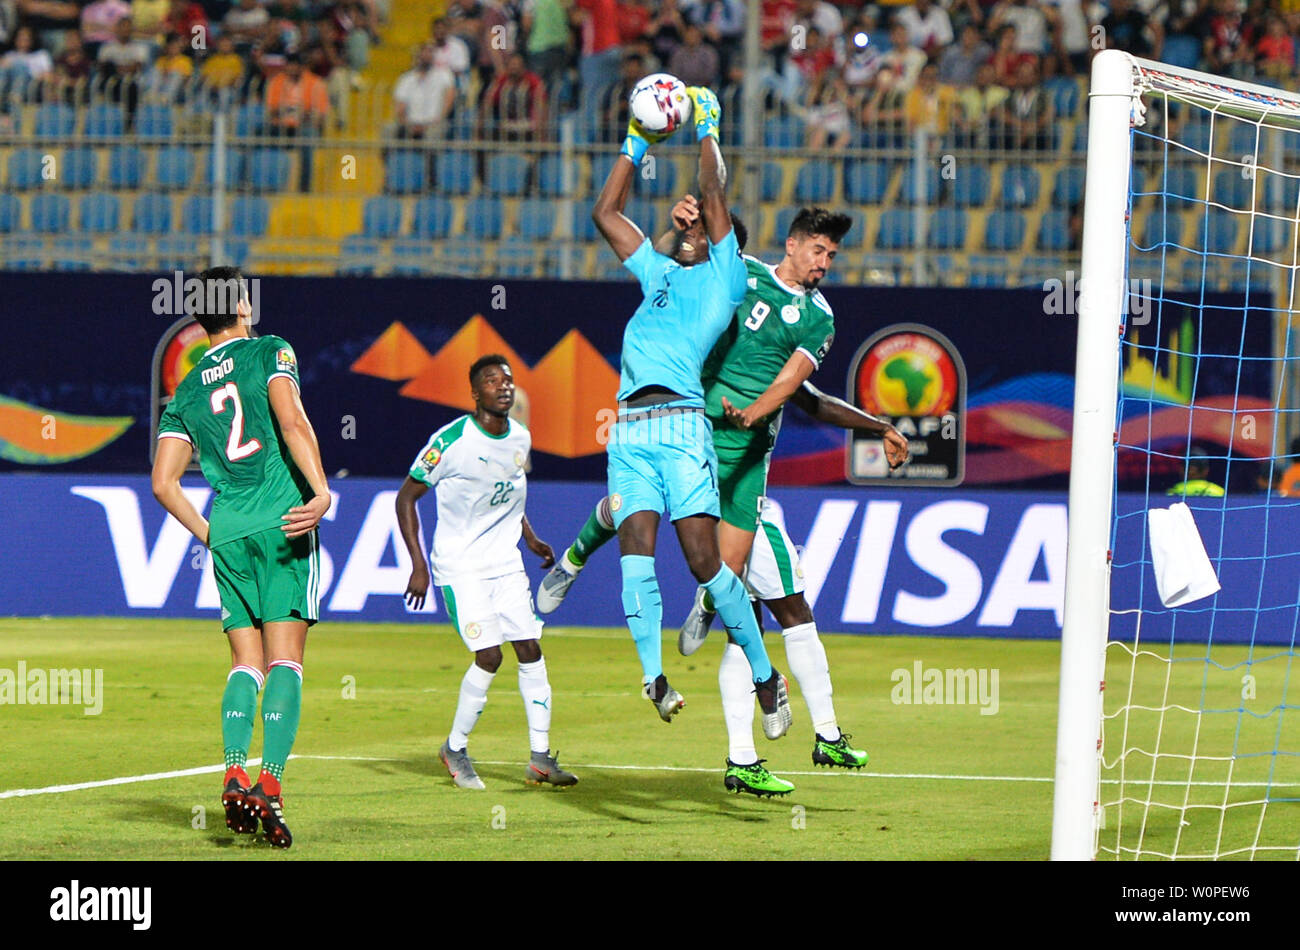 Cairo, Egypt. 27th June, 2019. Baghdad Bounedjah (1st R) of Algeria vies with Senegal's goalkeeper Edouard Osoque Mendy (2nd R) during the 2019 African Cup of Nations Group C match between Senegal and Algeria in Cairo, Egypt, on June 27, 2019. Algeria won 1-0. Credit: Li Yan/Xinhua/Alamy Live News Stock Photo